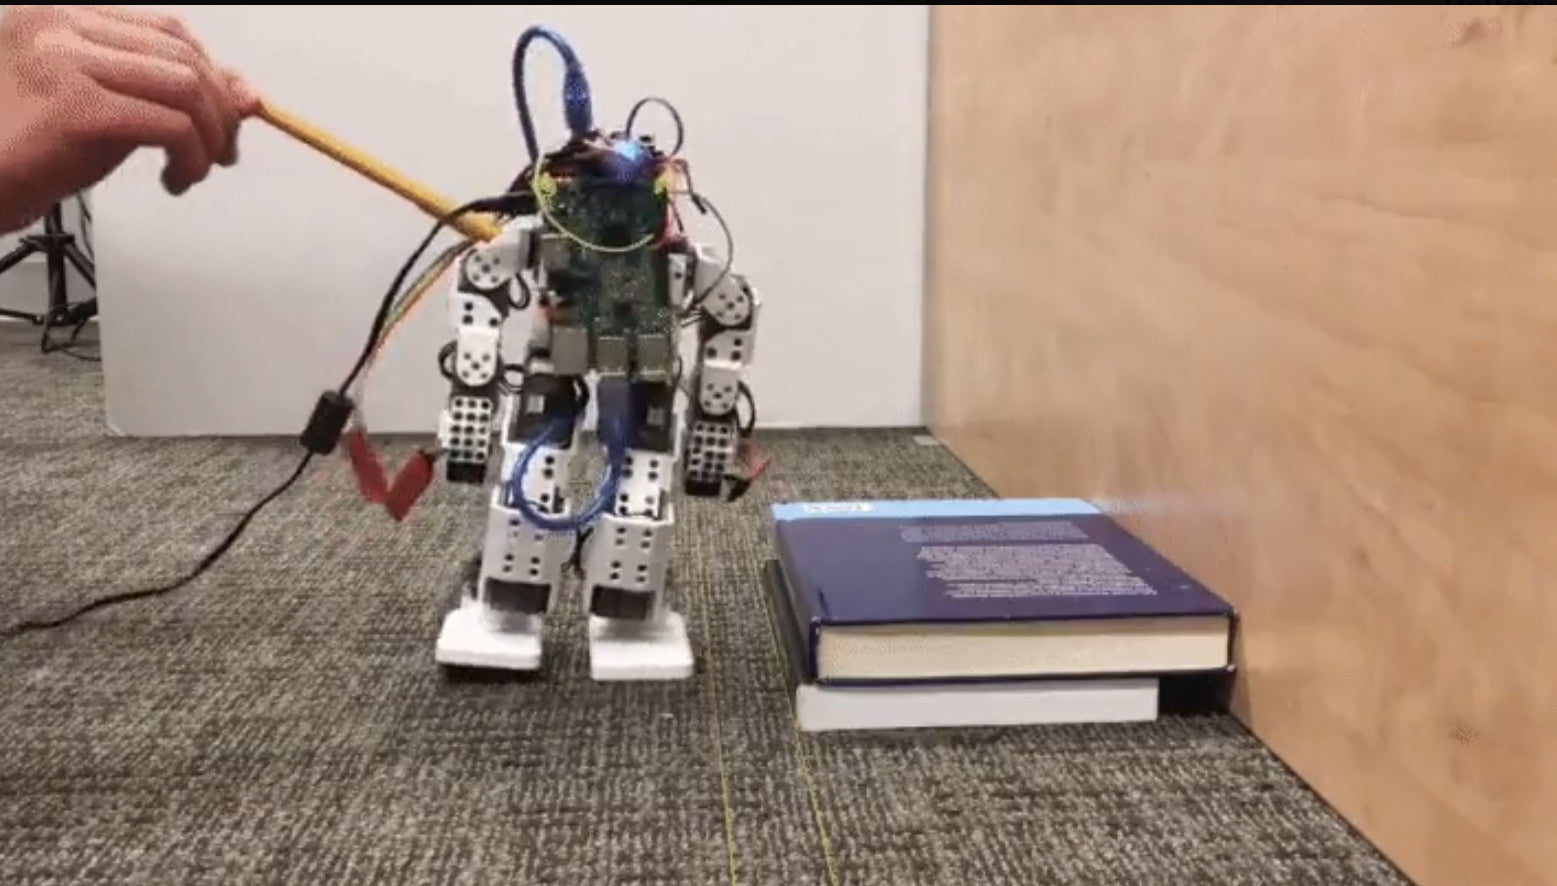 A Raspberry Pi Helps This Bipedal Robot Catch Itself When It Falls